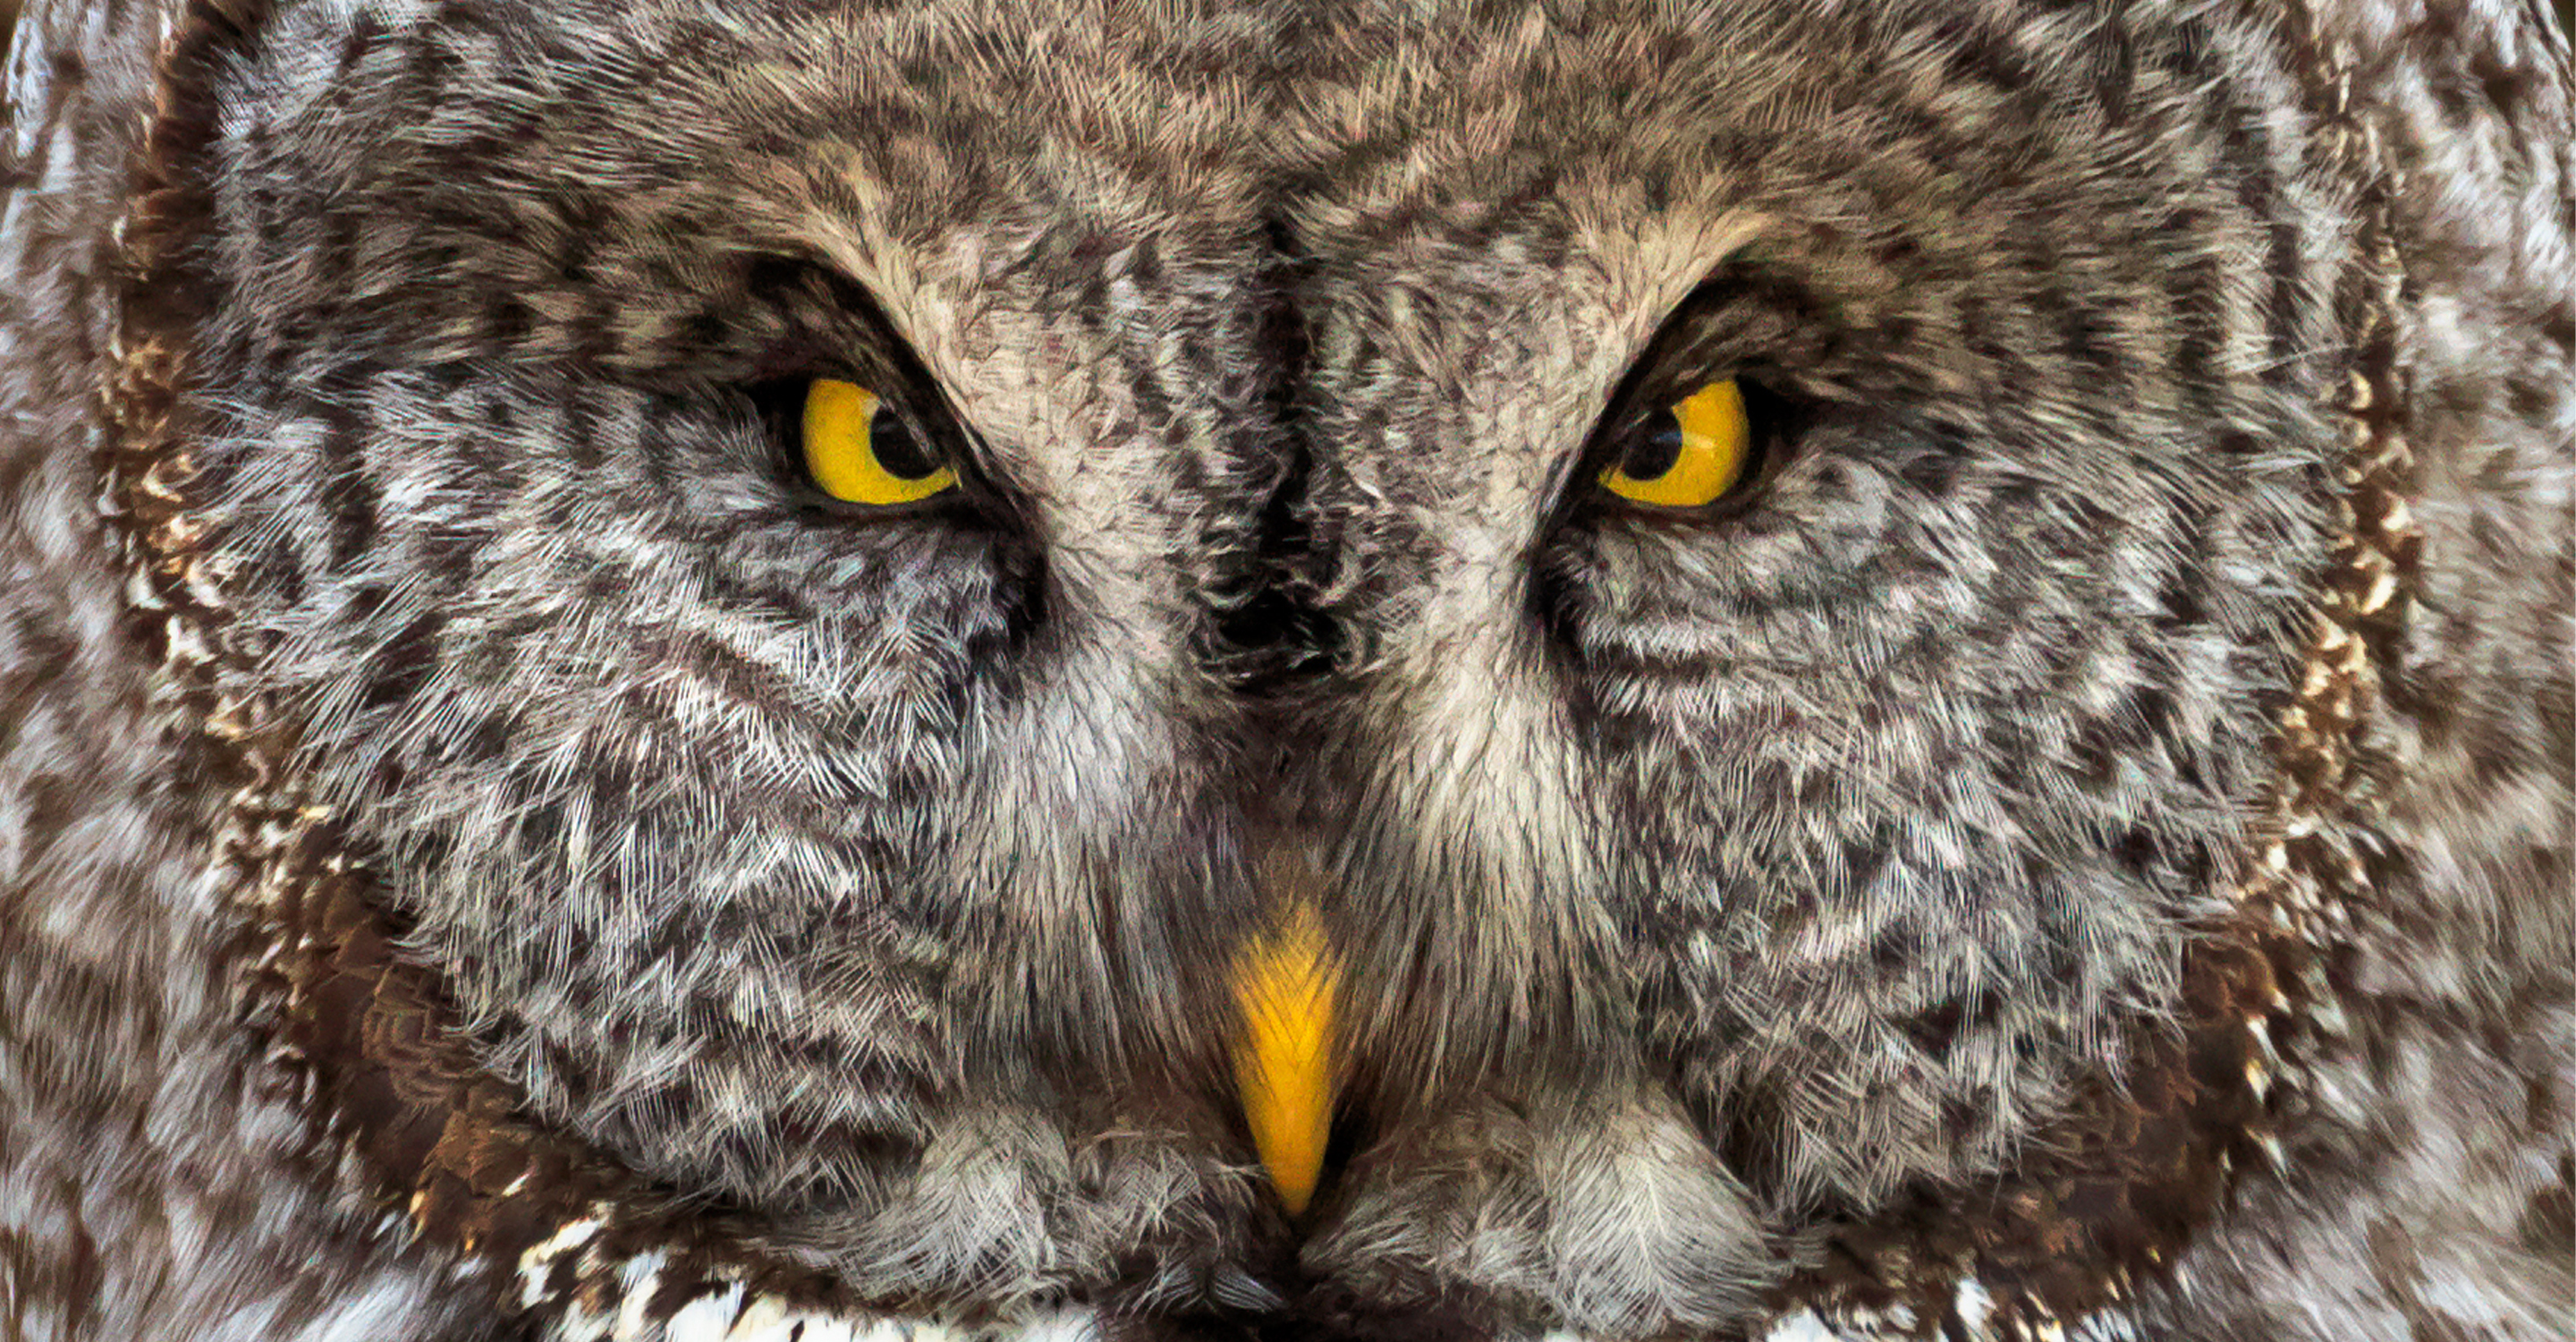 A close up of a great gray owl in Yellowstone National Park, United States